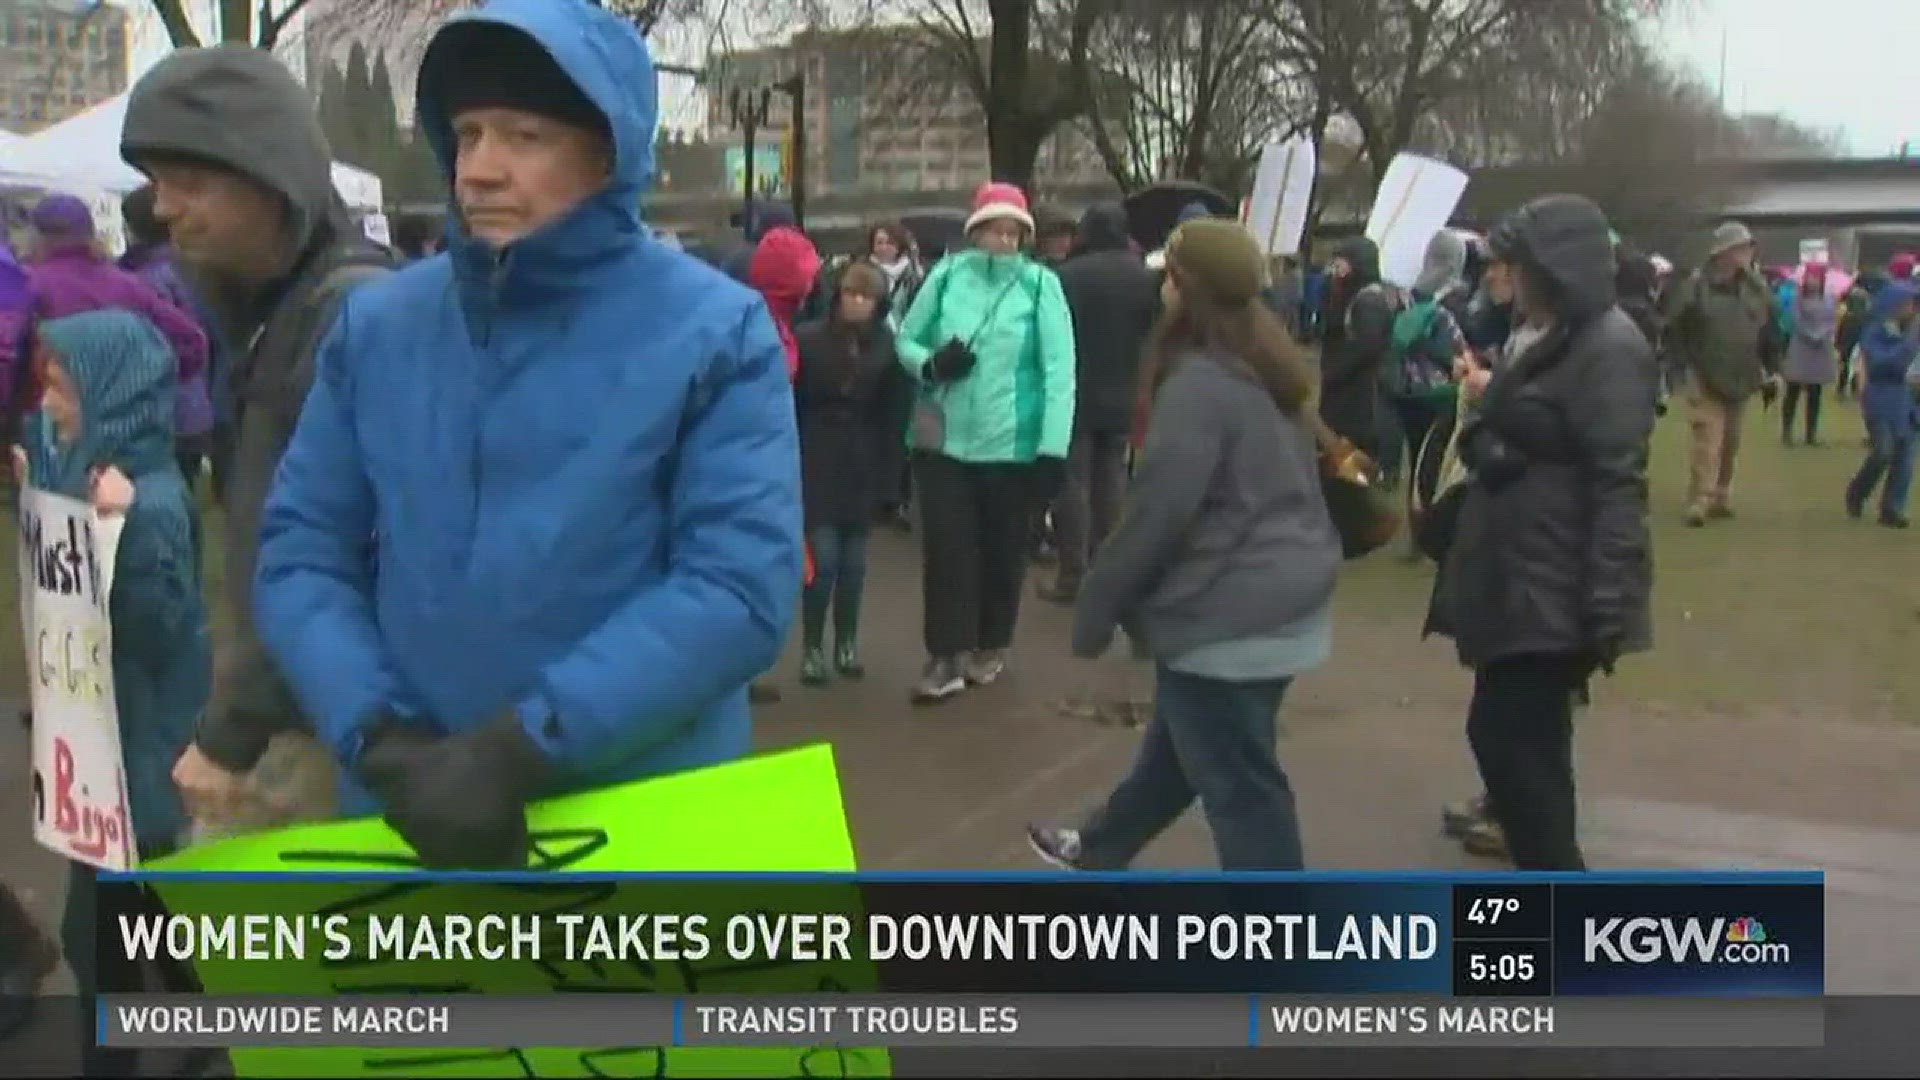 Organizers say 100,000 people join Women's March in Portland